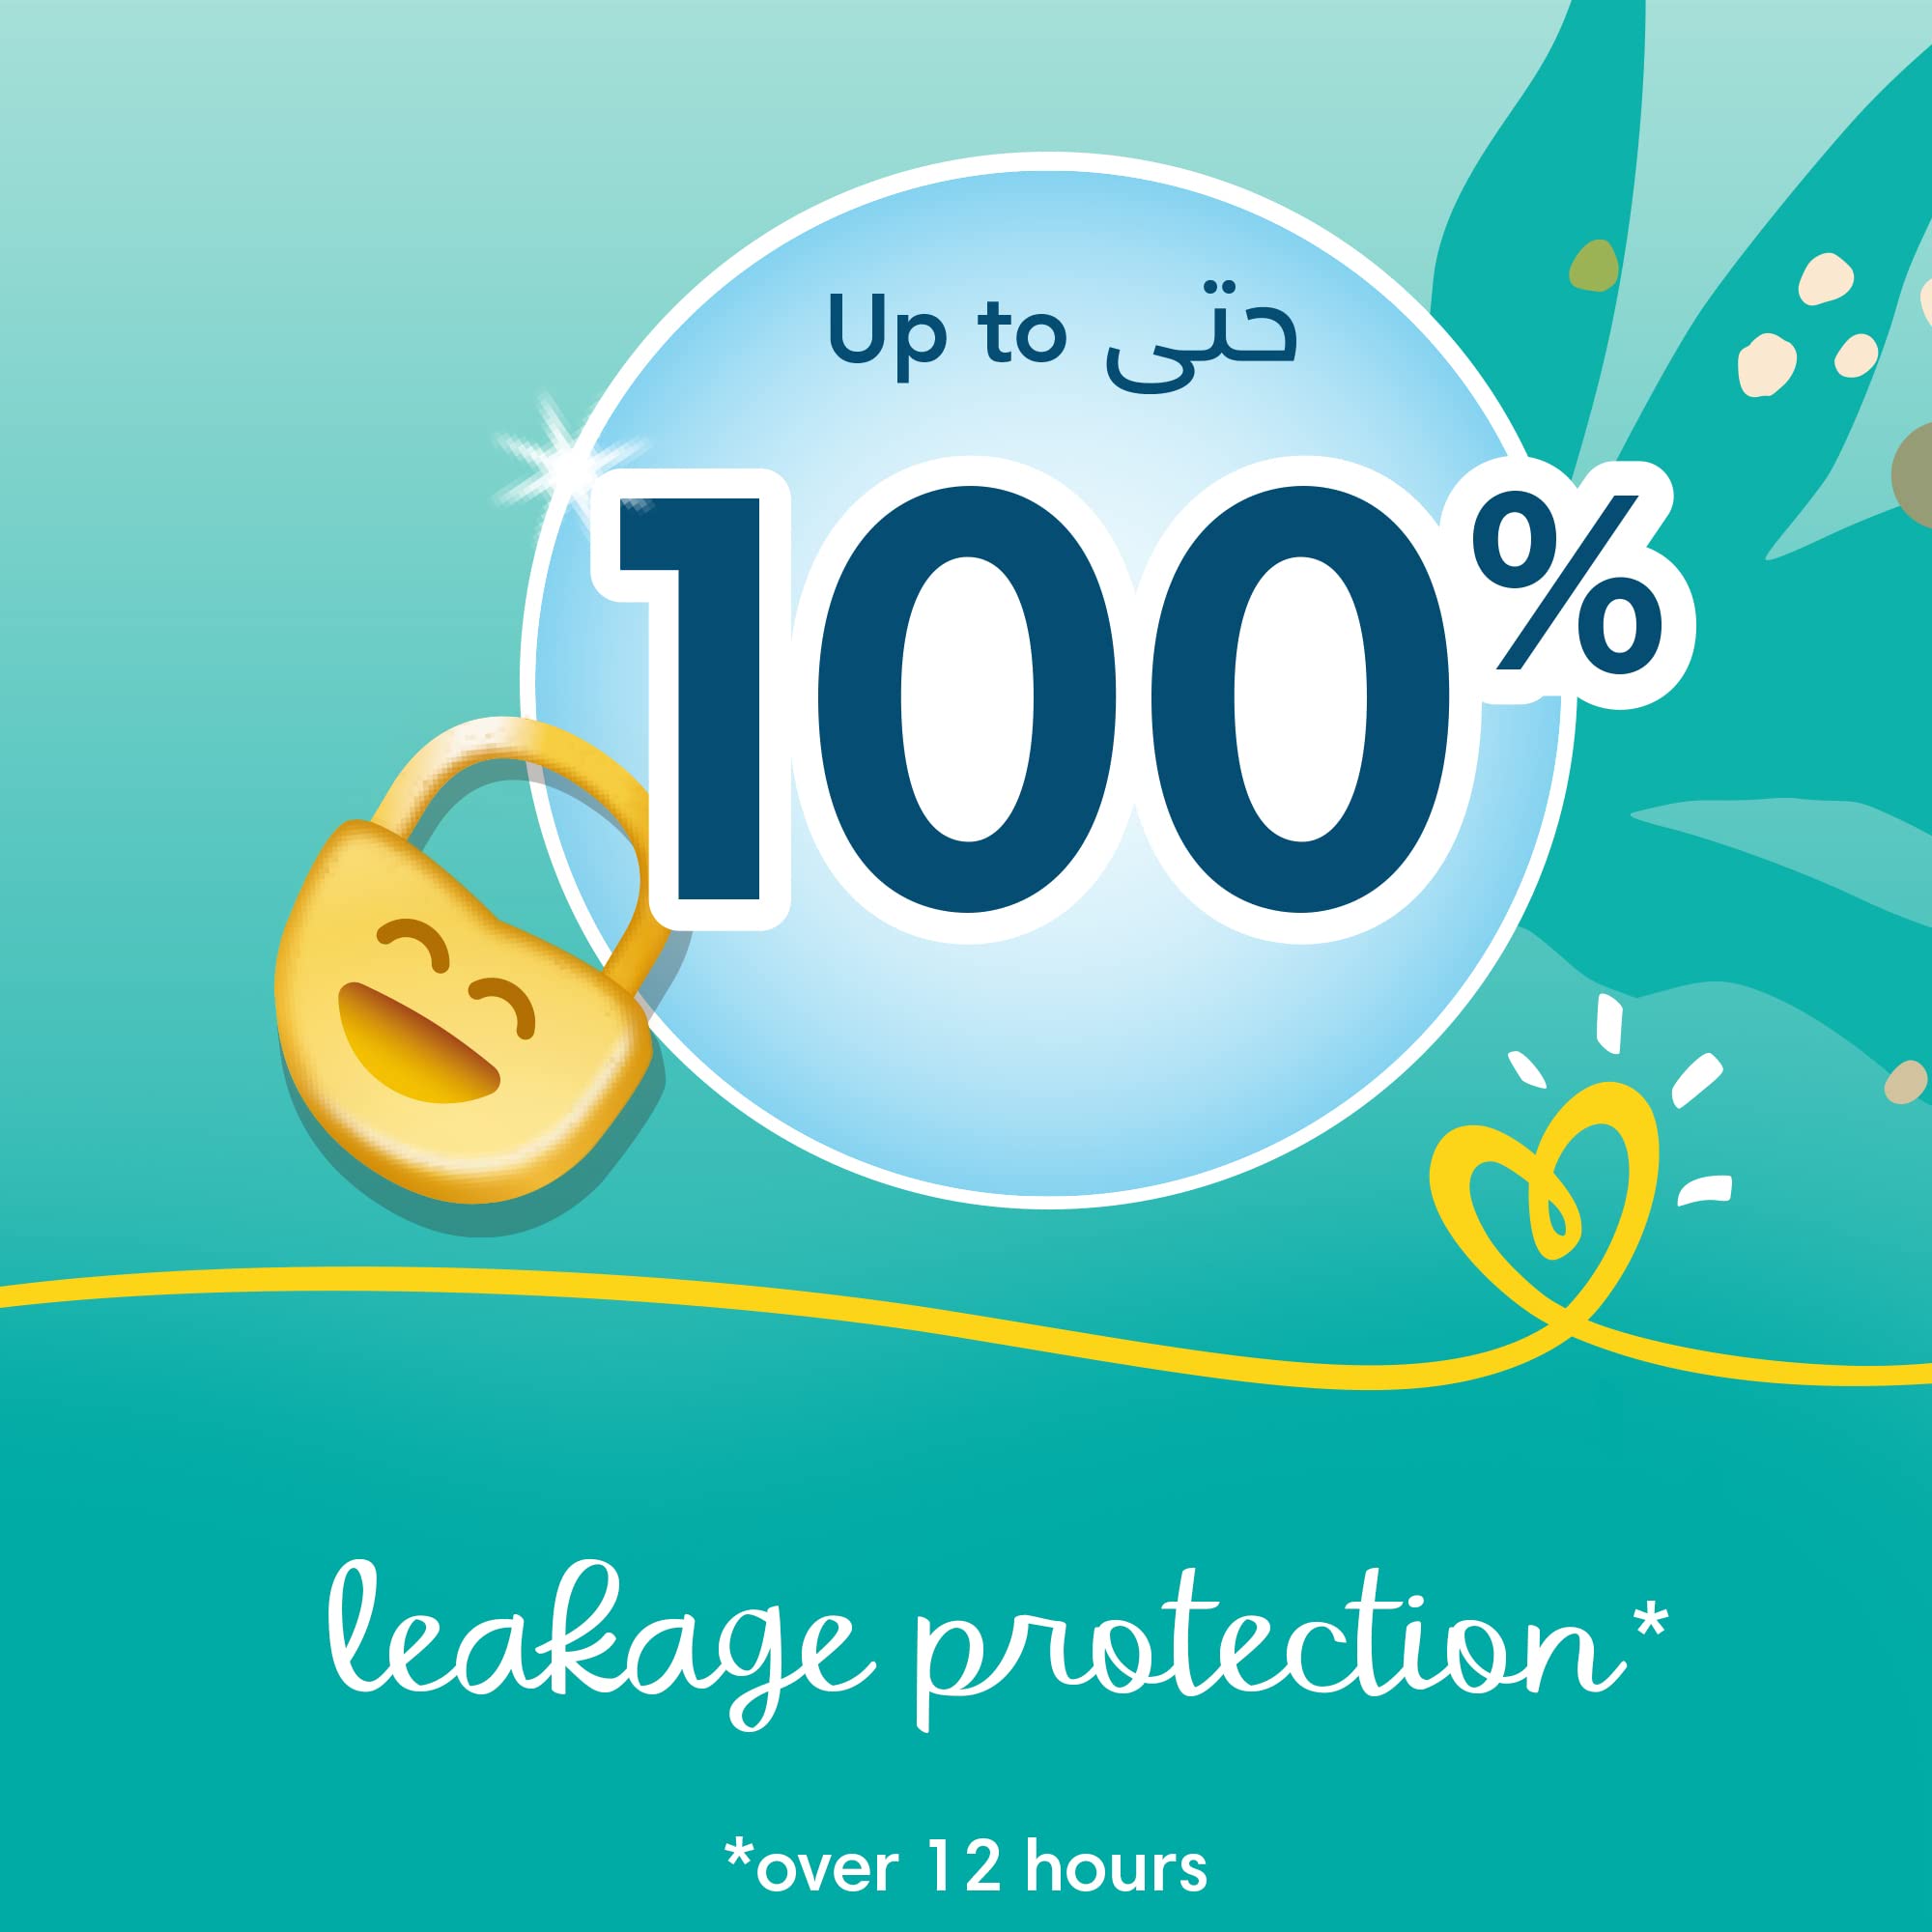 Pampers Baby-Dry Diapers with Aloe Vera Lotion and Leakage Protection, Size 4, 9-14 kg, 96 Diapers ( 16 Diapers × 6 ) حفاضات بامبرز اكتيف بيبي دراي، حجم 4، ميجا باك - 7-14 كغم، 96 قطعة